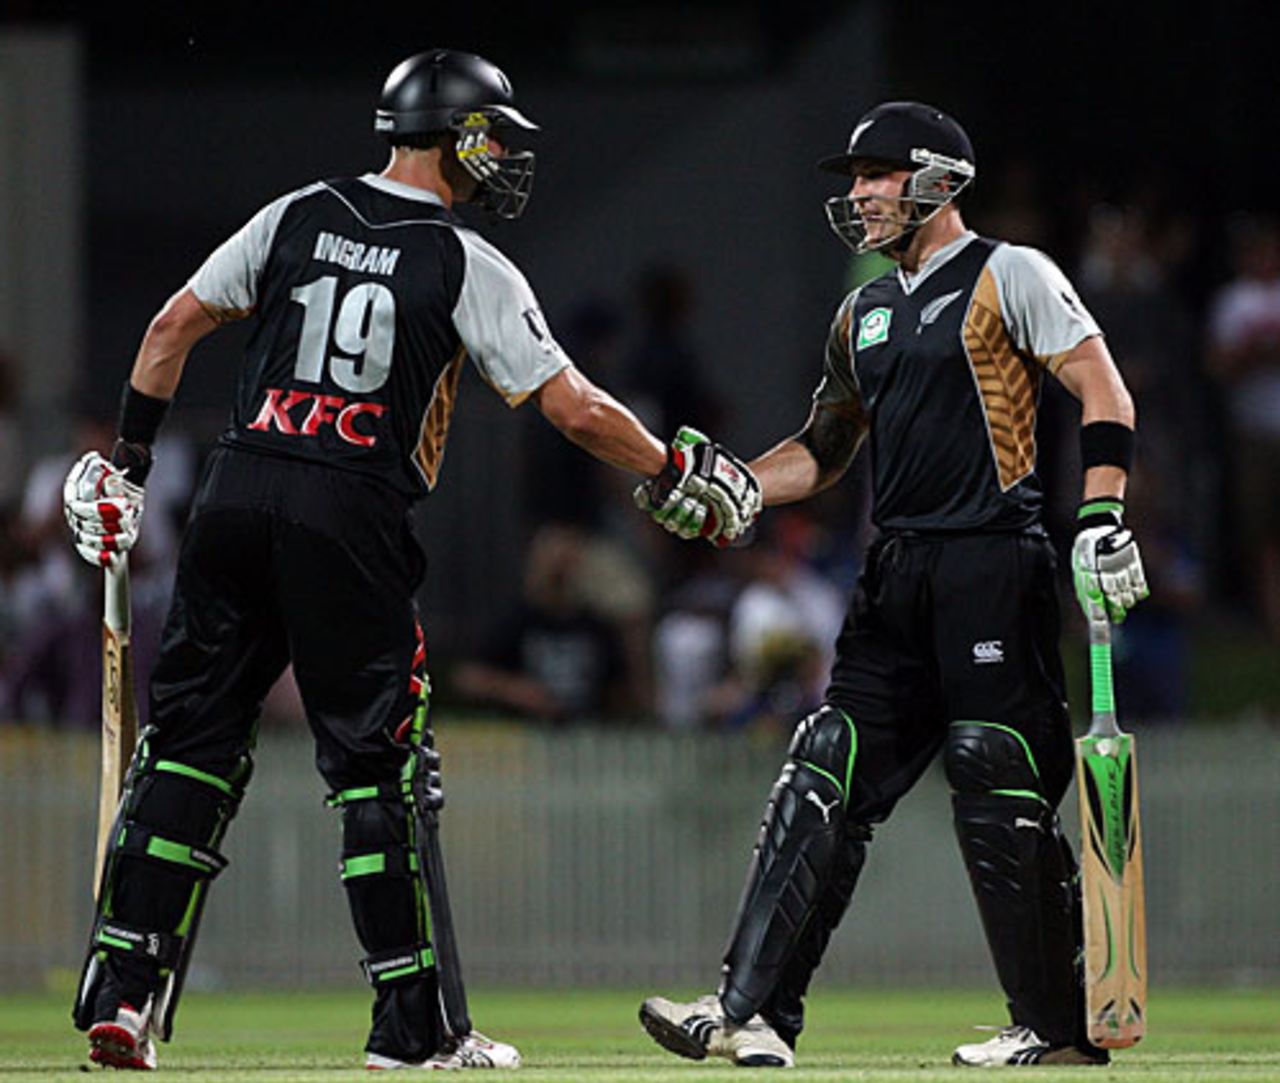 Brendon McCullum is congratulated by Peter Ingram on getting to his fifty, New Zealand v Bangladesh, only Twenty20, Hamilton, February 3, 2010